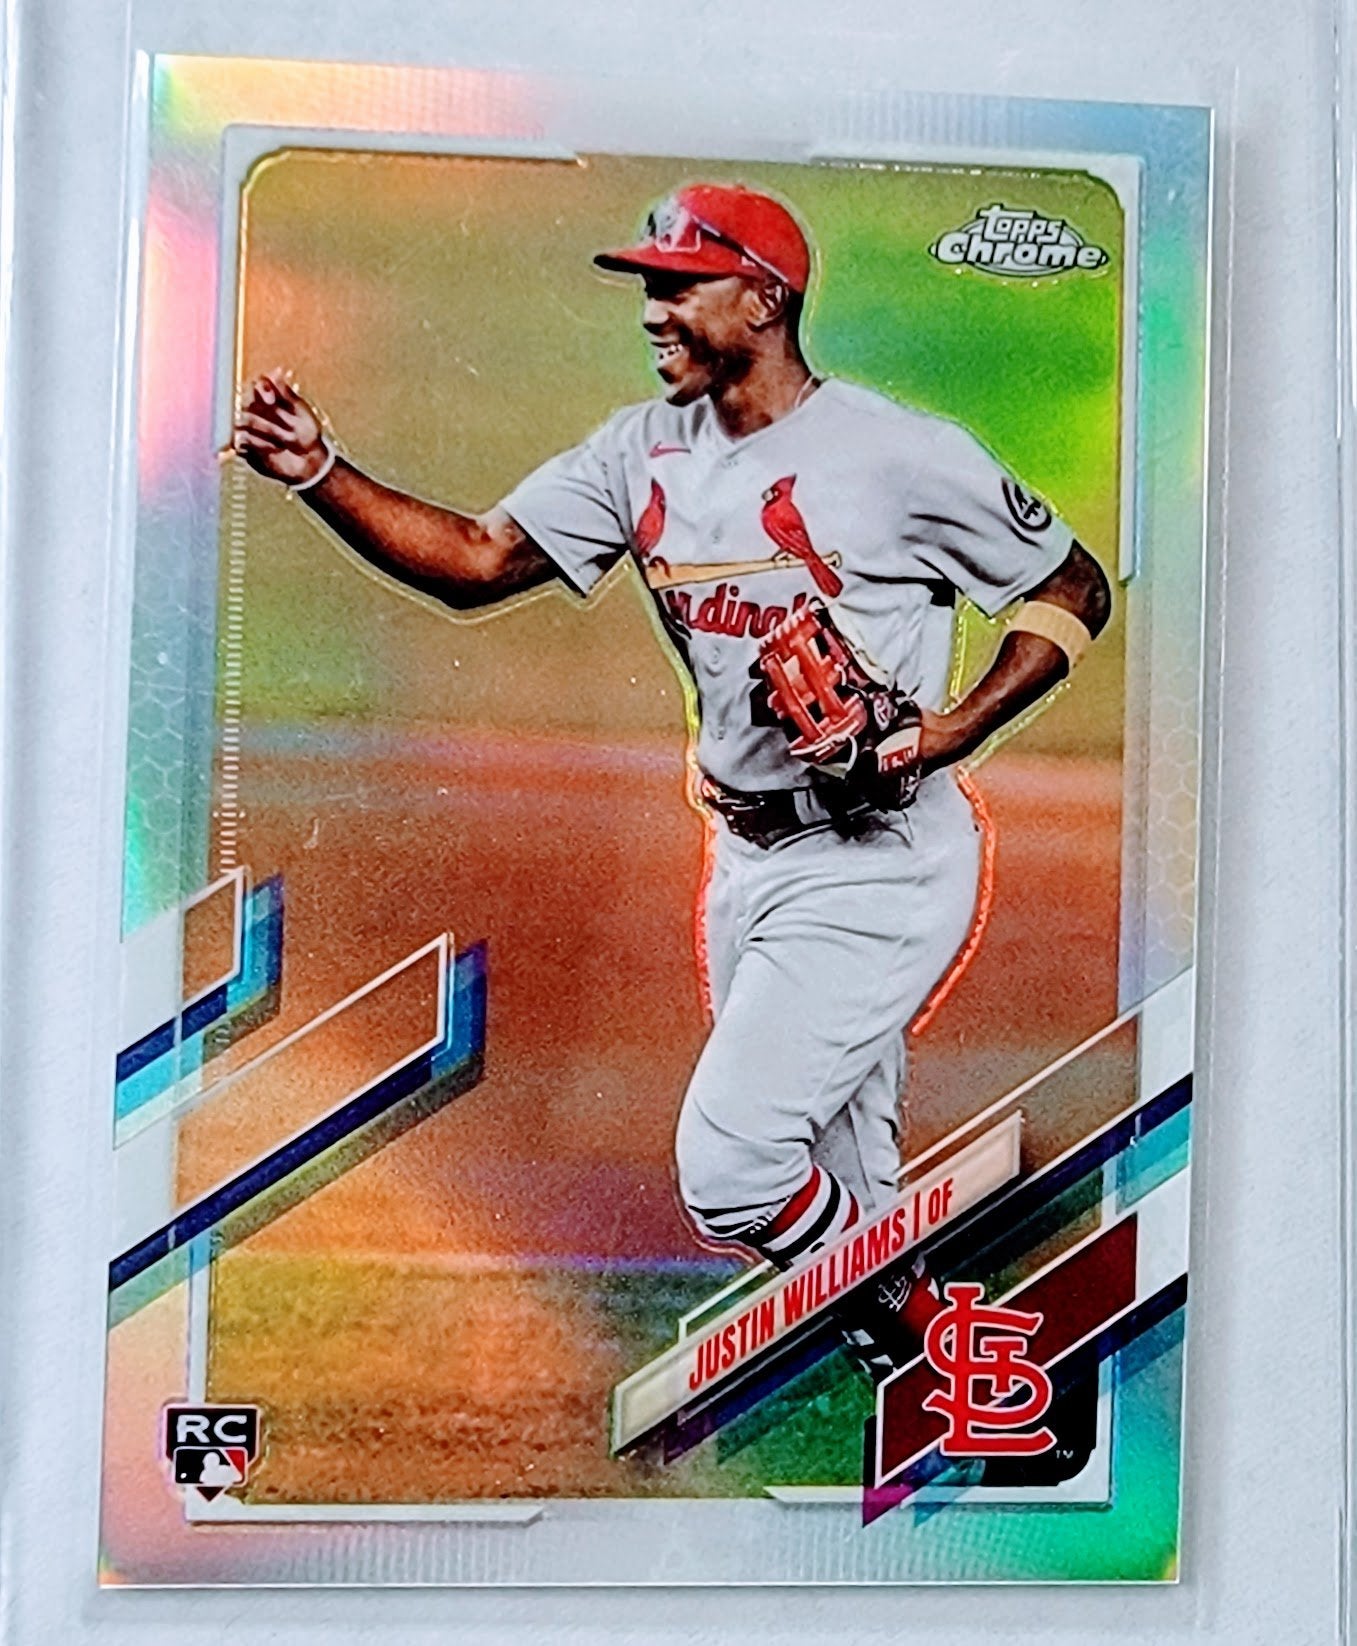 2021 Topps Chrome Justin Williams Refractor Baseball Card AVM1 simple Xclusive Collectibles   